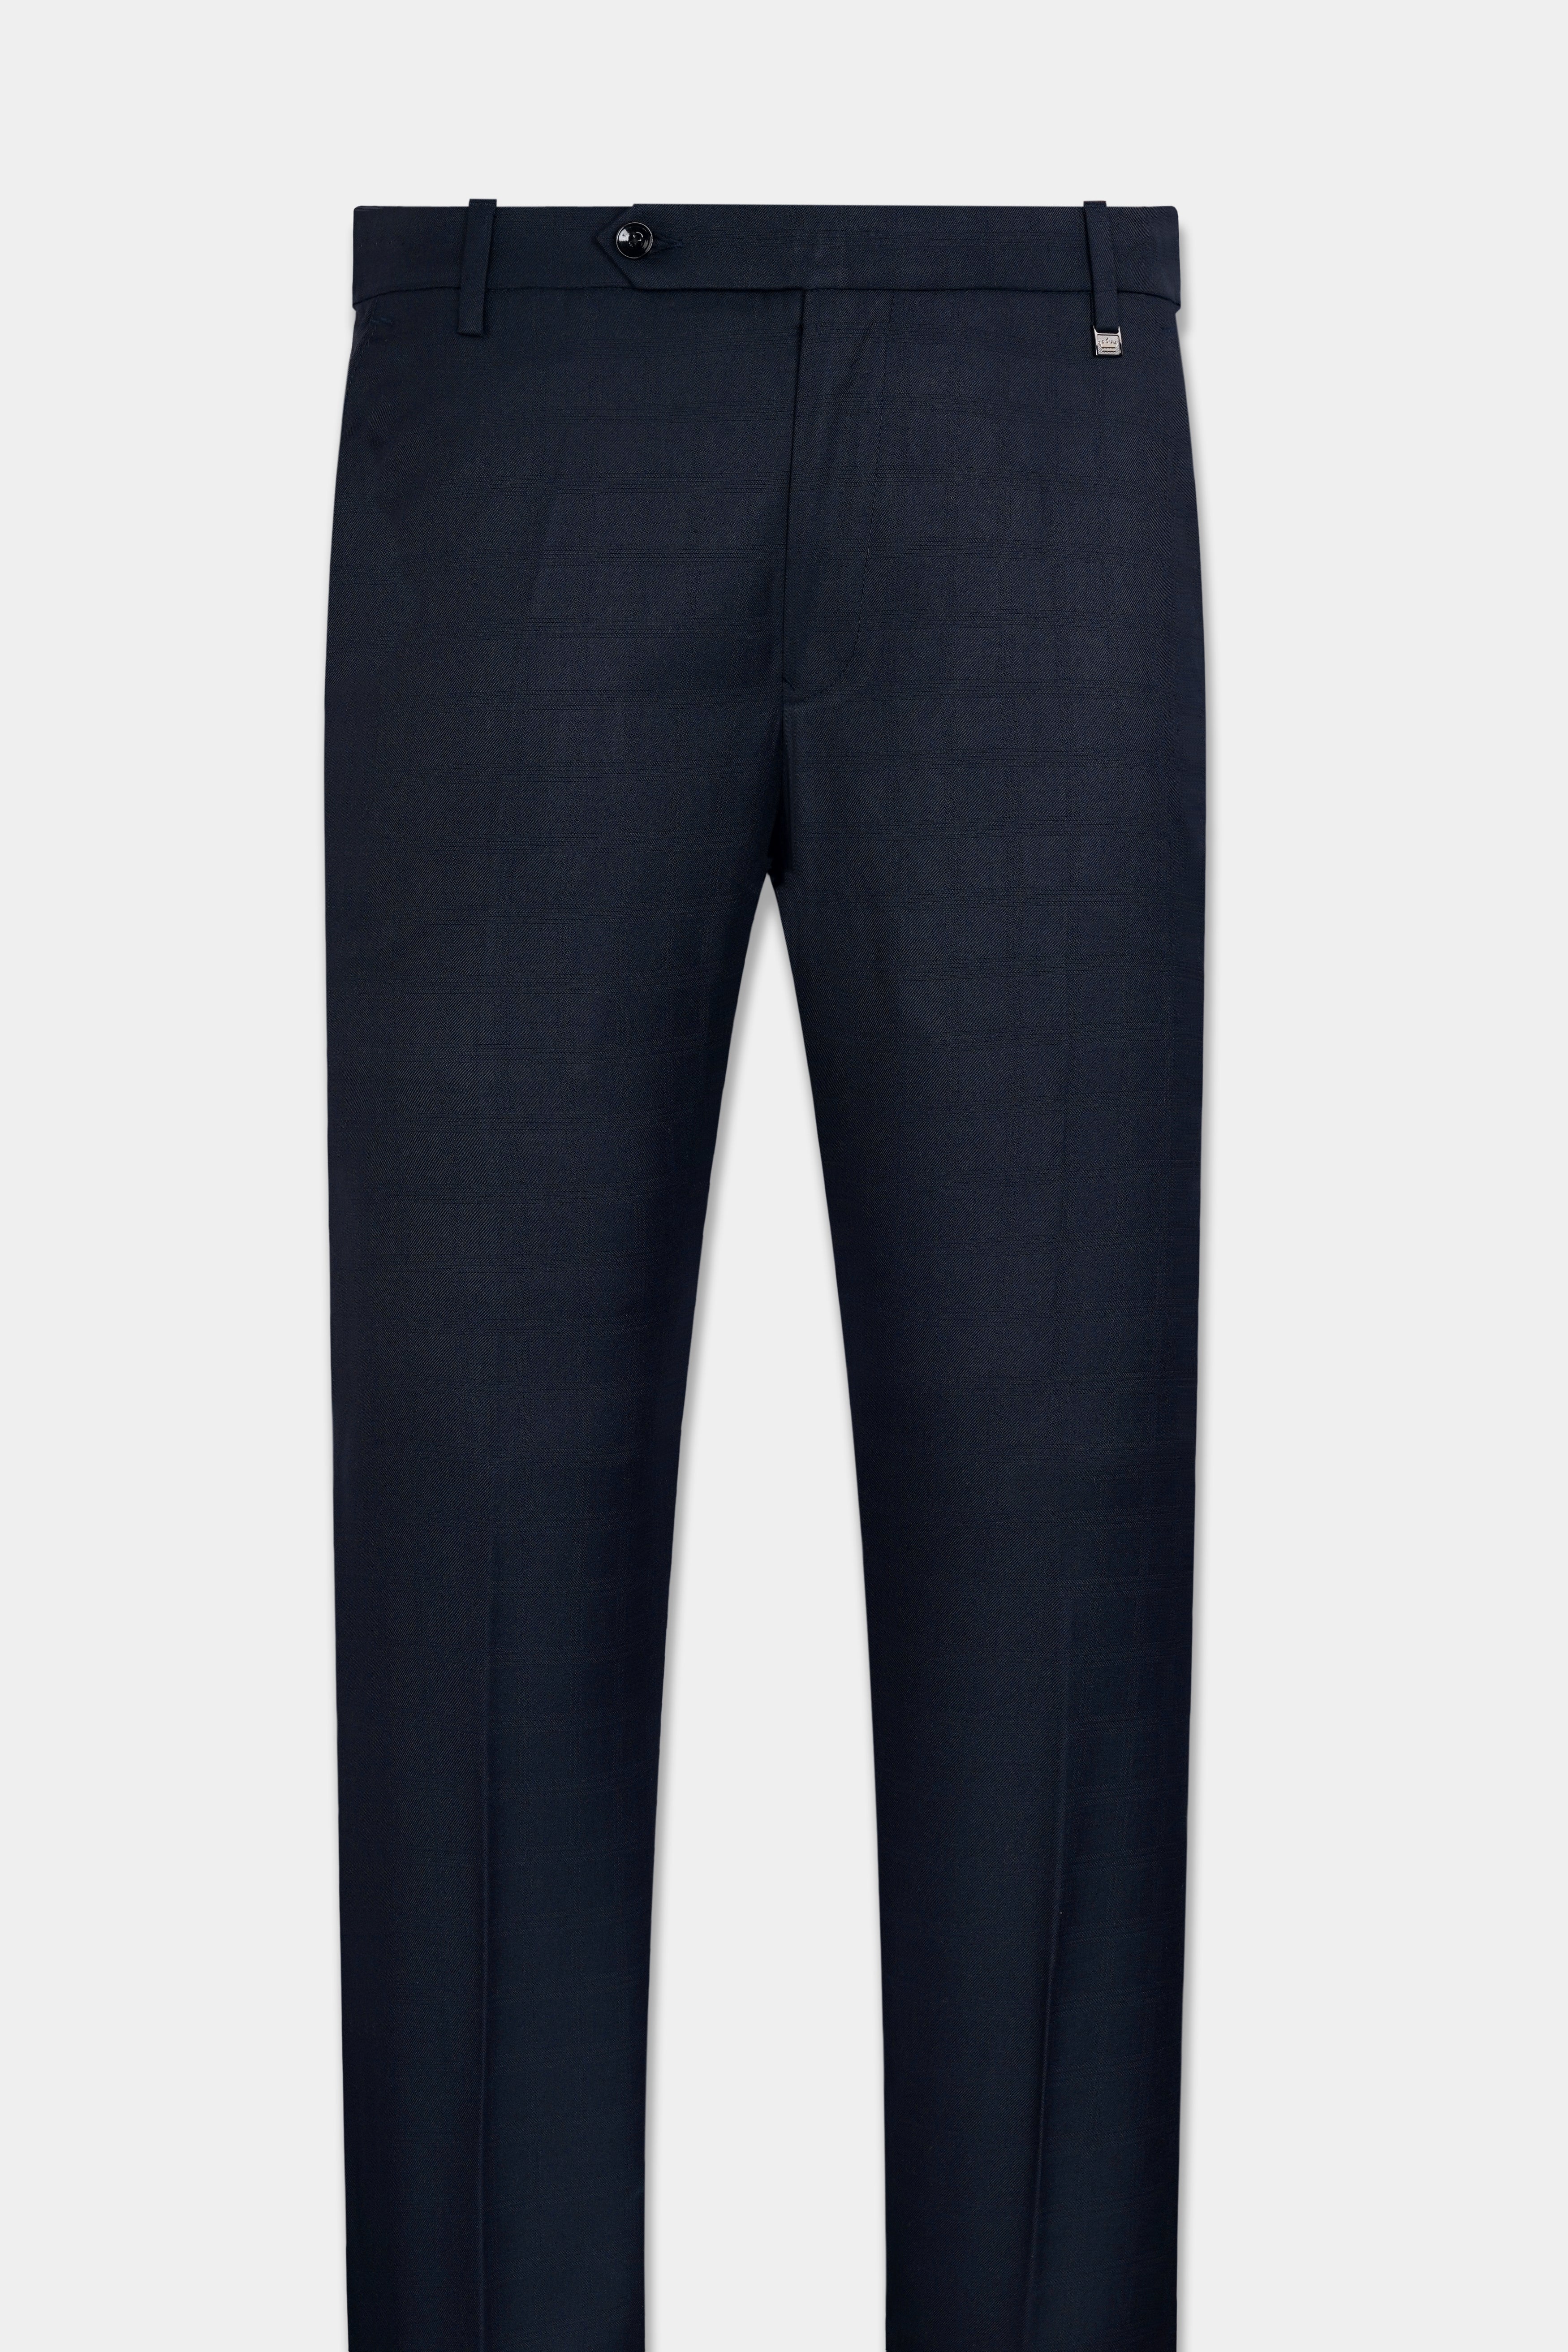 Baltic Blue Subtle Checkered Wool Rich Stretchable Waistband Pant